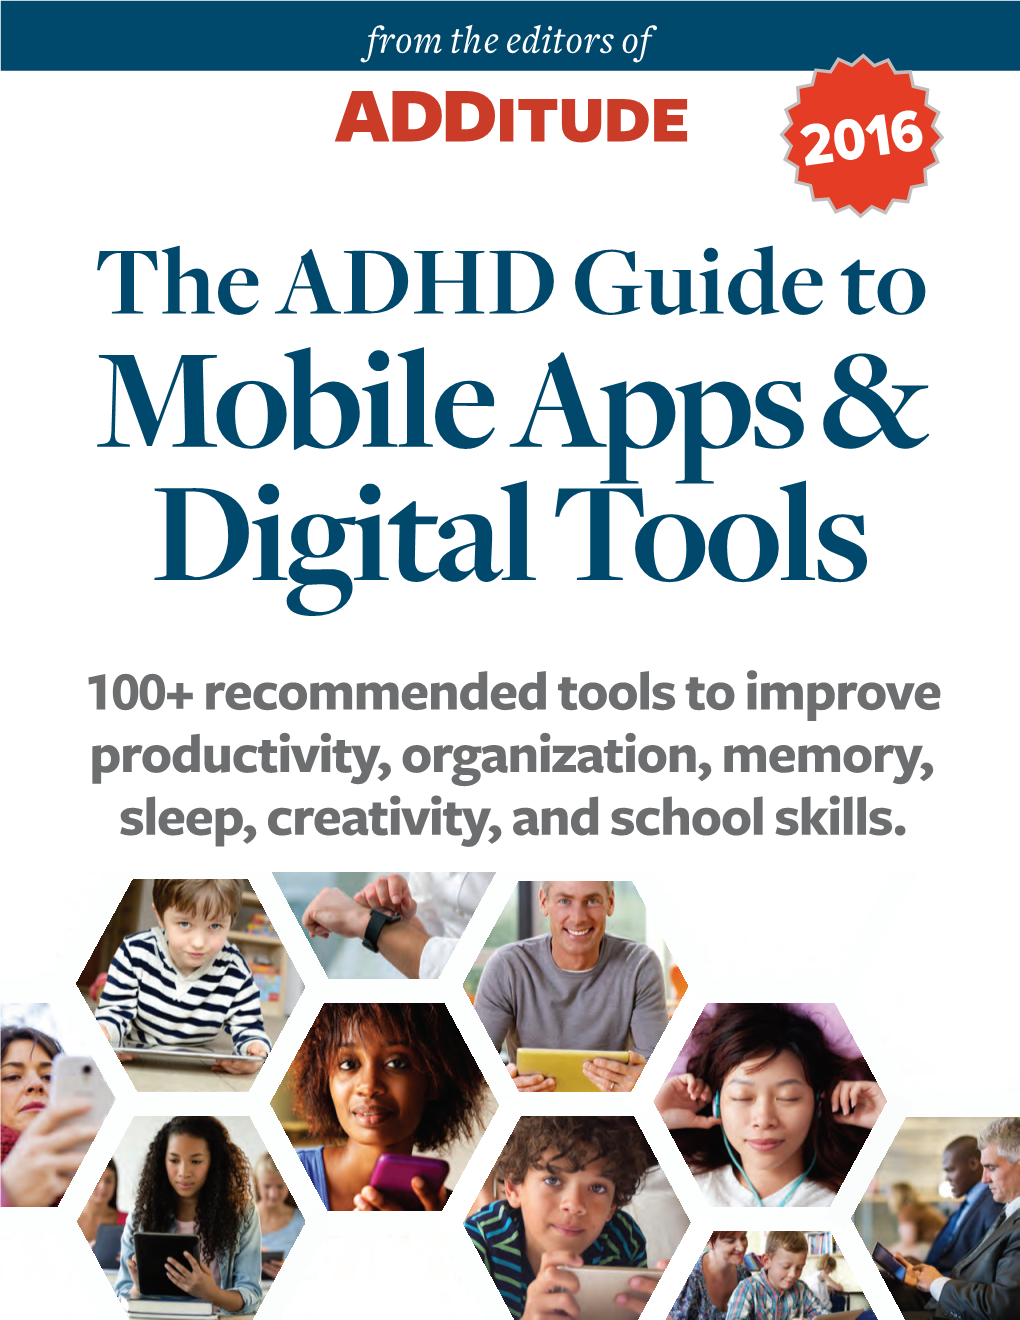 The ADHD Guide to Mobile Apps & Digital Tools